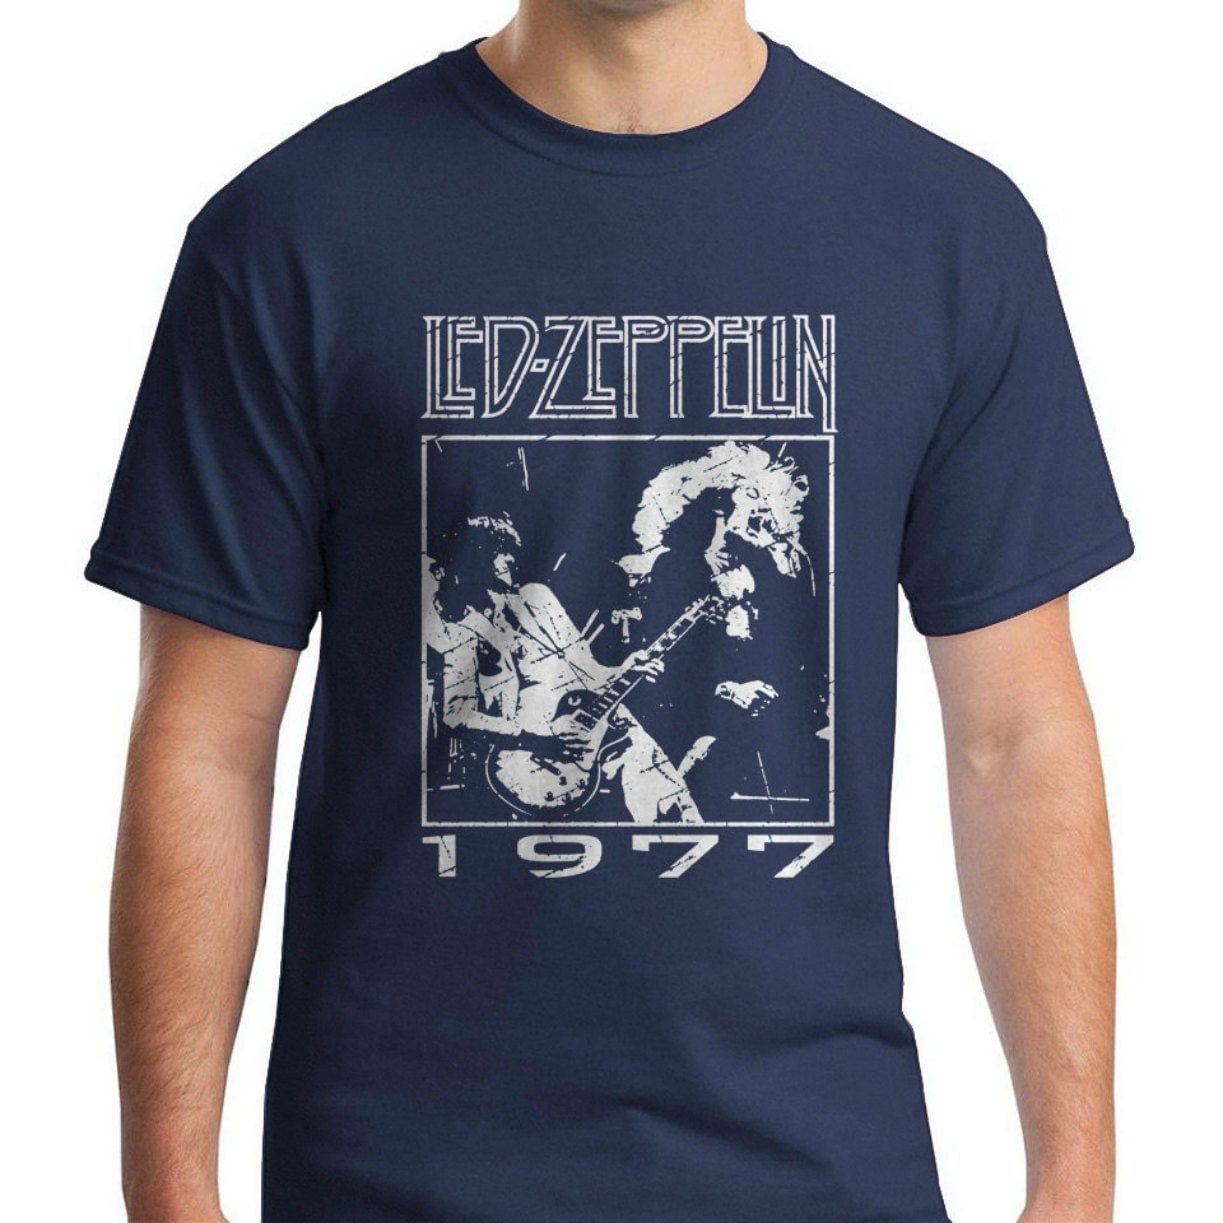 Led Zeppelin 1977 vintage style t shirt jimmy page by rockviewtees